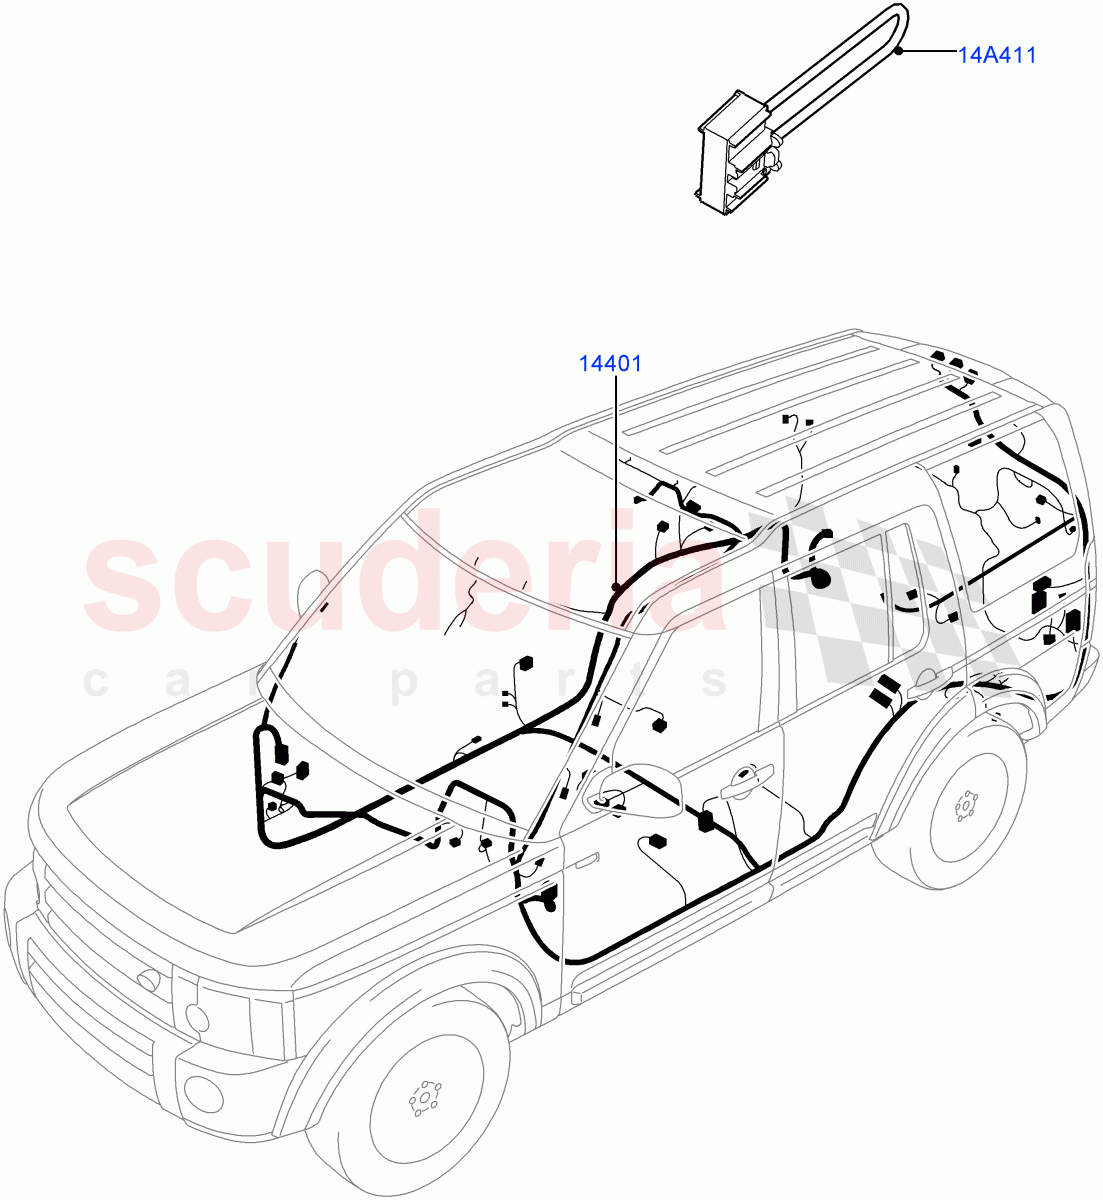 Electrical Wiring - Engine And Dash(Main Harness)((V)FROMCA000001,(V)TOFA999999) of Land Rover Land Rover Discovery 4 (2010-2016) [3.0 DOHC GDI SC V6 Petrol]